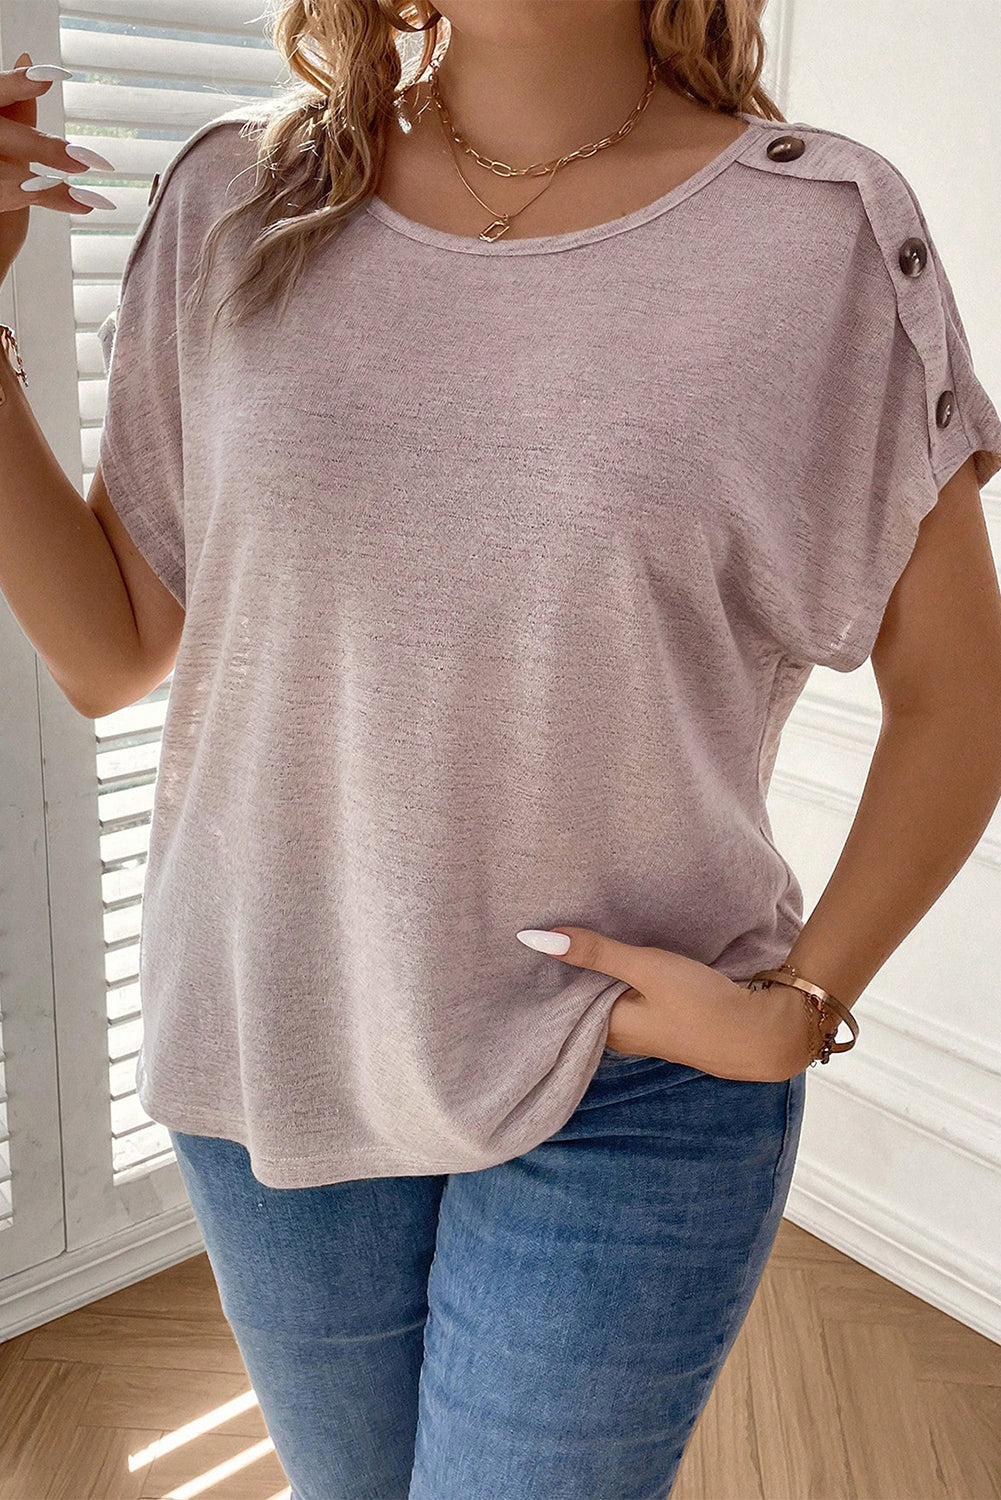 Delicacy Plus Size Button Detail Batwing Sleeve Tee